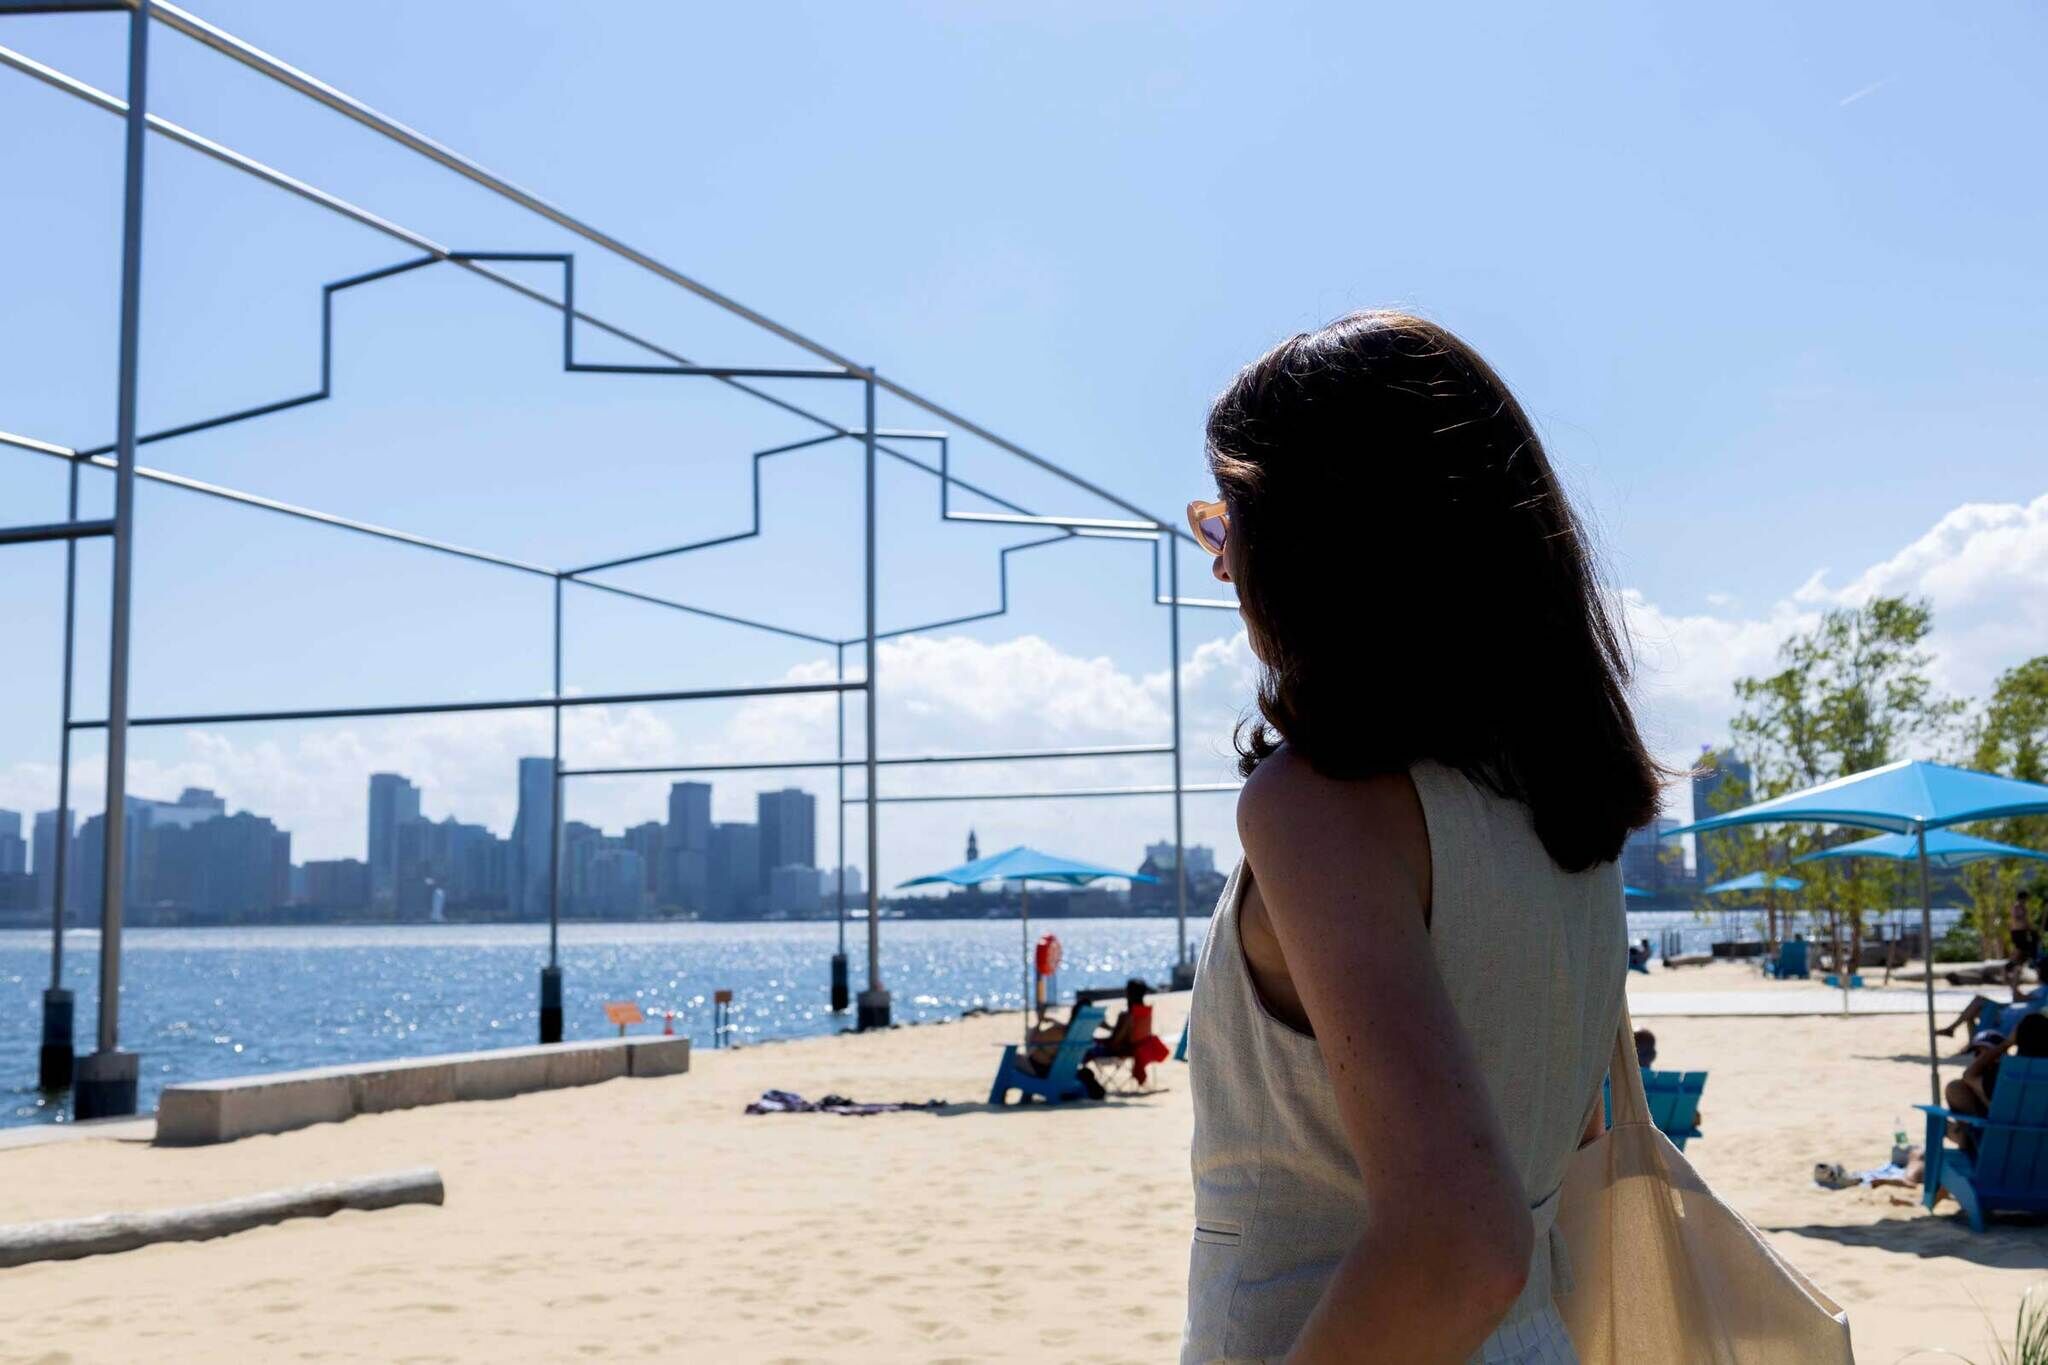 A woman with dark hair stands on a sandy beach, facing a city skyline across the water. Blue umbrellas and beach chairs are scattered around.